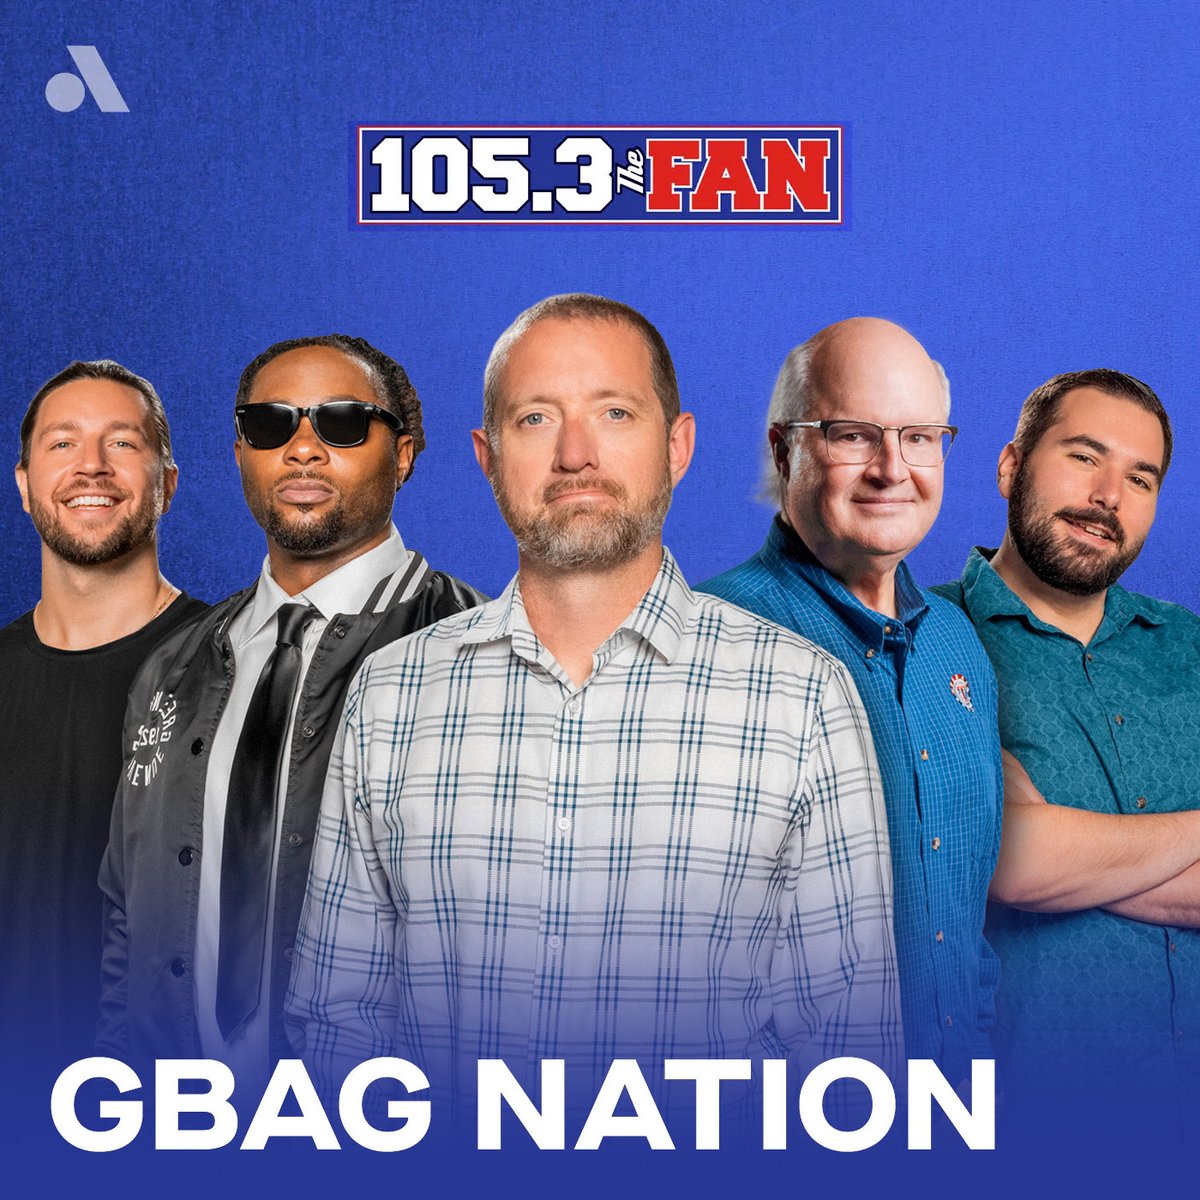 The @gbagnation starts NOW! 🎧audacy.com/stations/1053t… 📺twitch.tv/dallasfancam 📺youtube.com/1053thefan